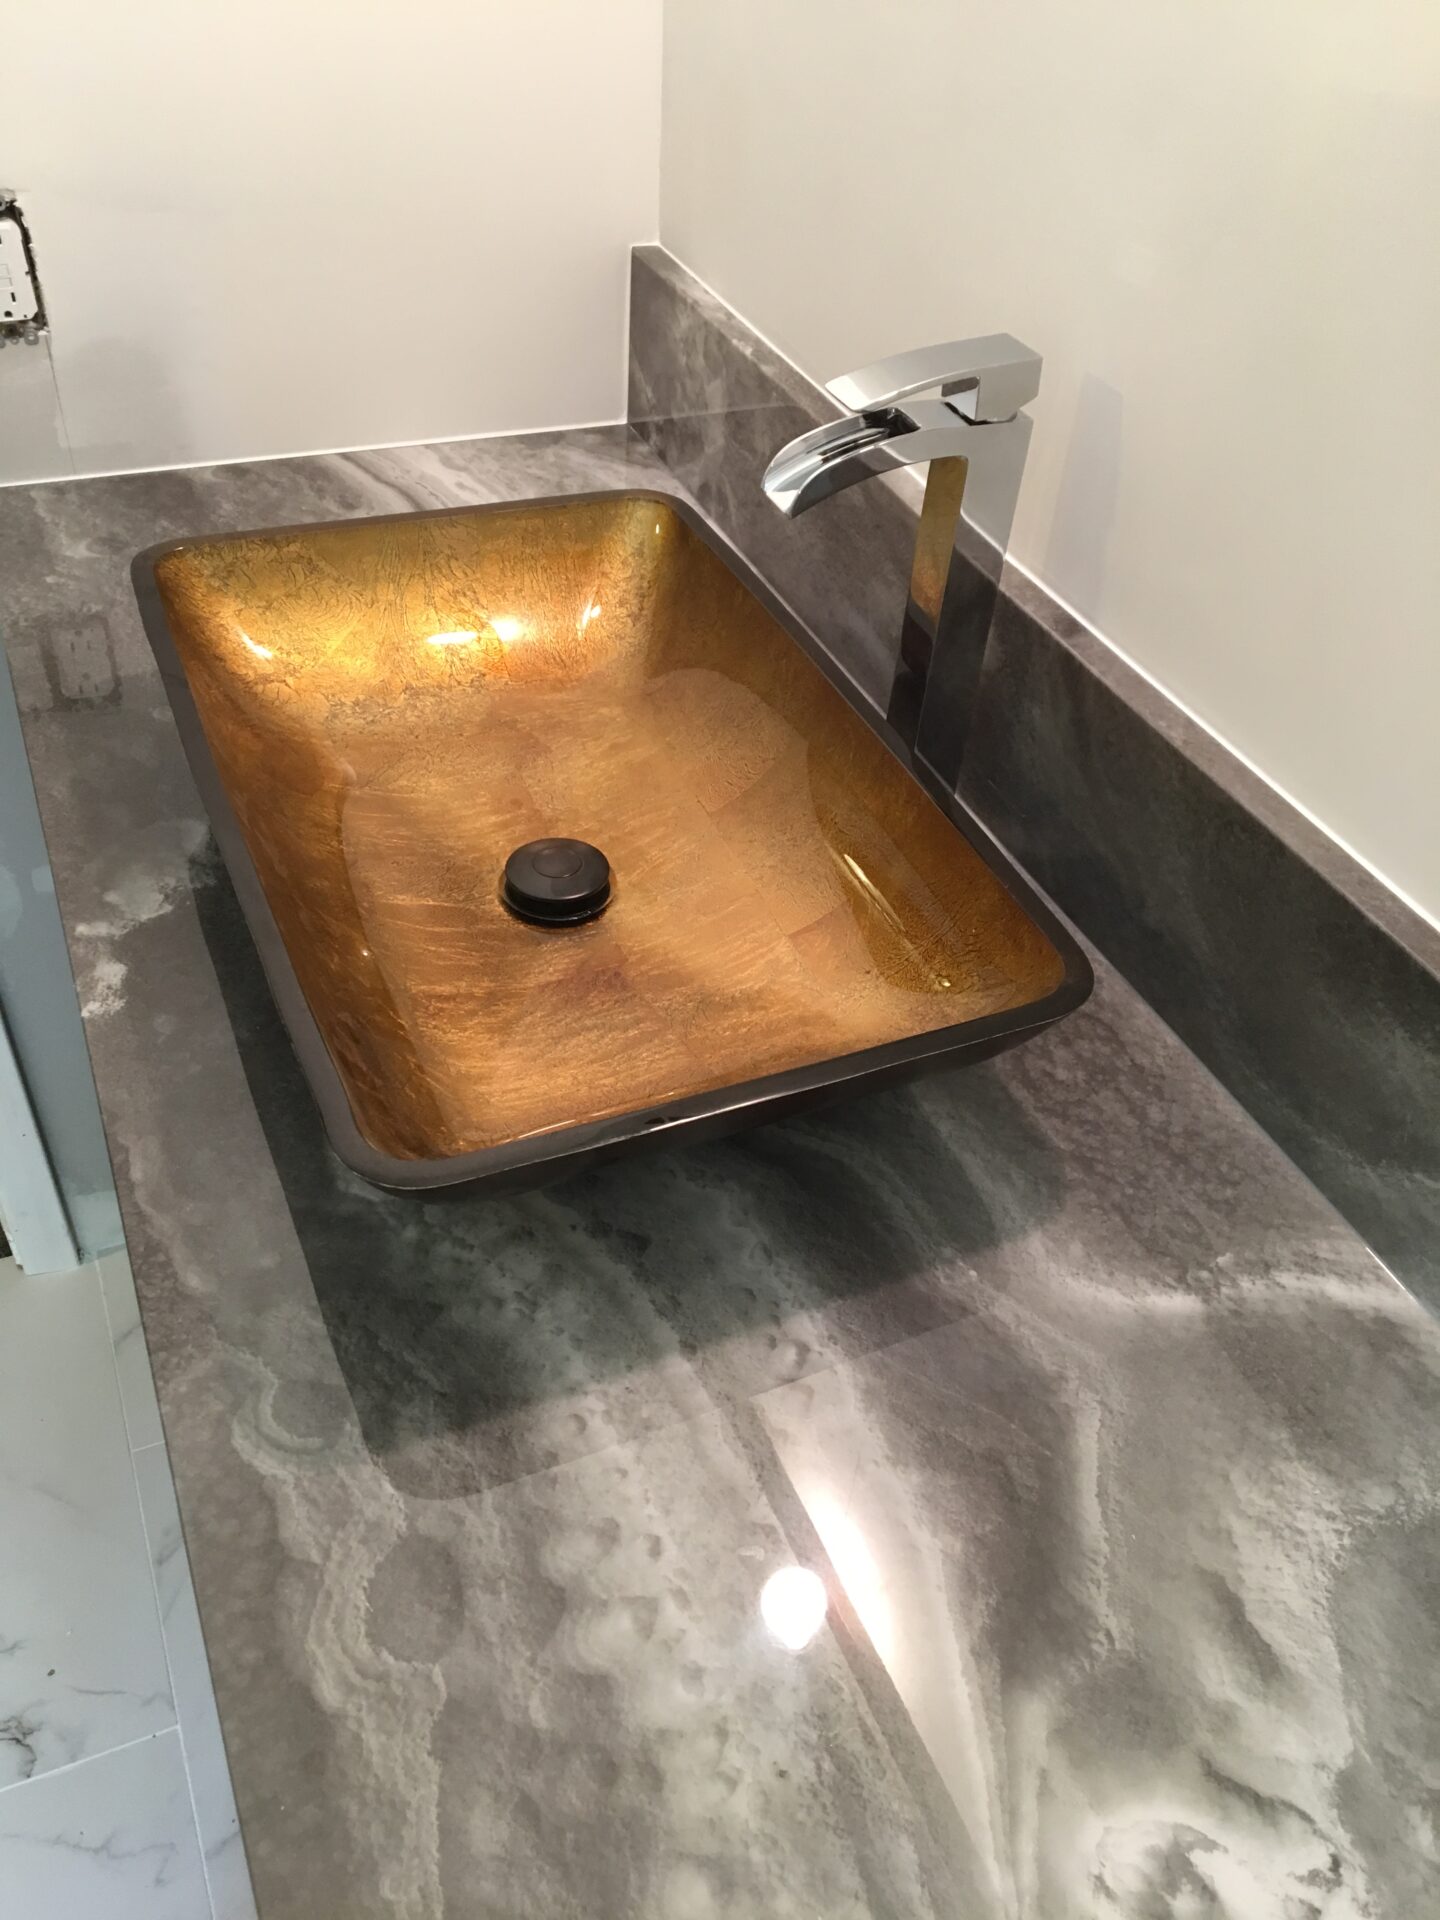 AMI Gold Sink on Tyvarian Vanity Top. Custom Bath Surfaces from American Marble Industries in Canton, OH.